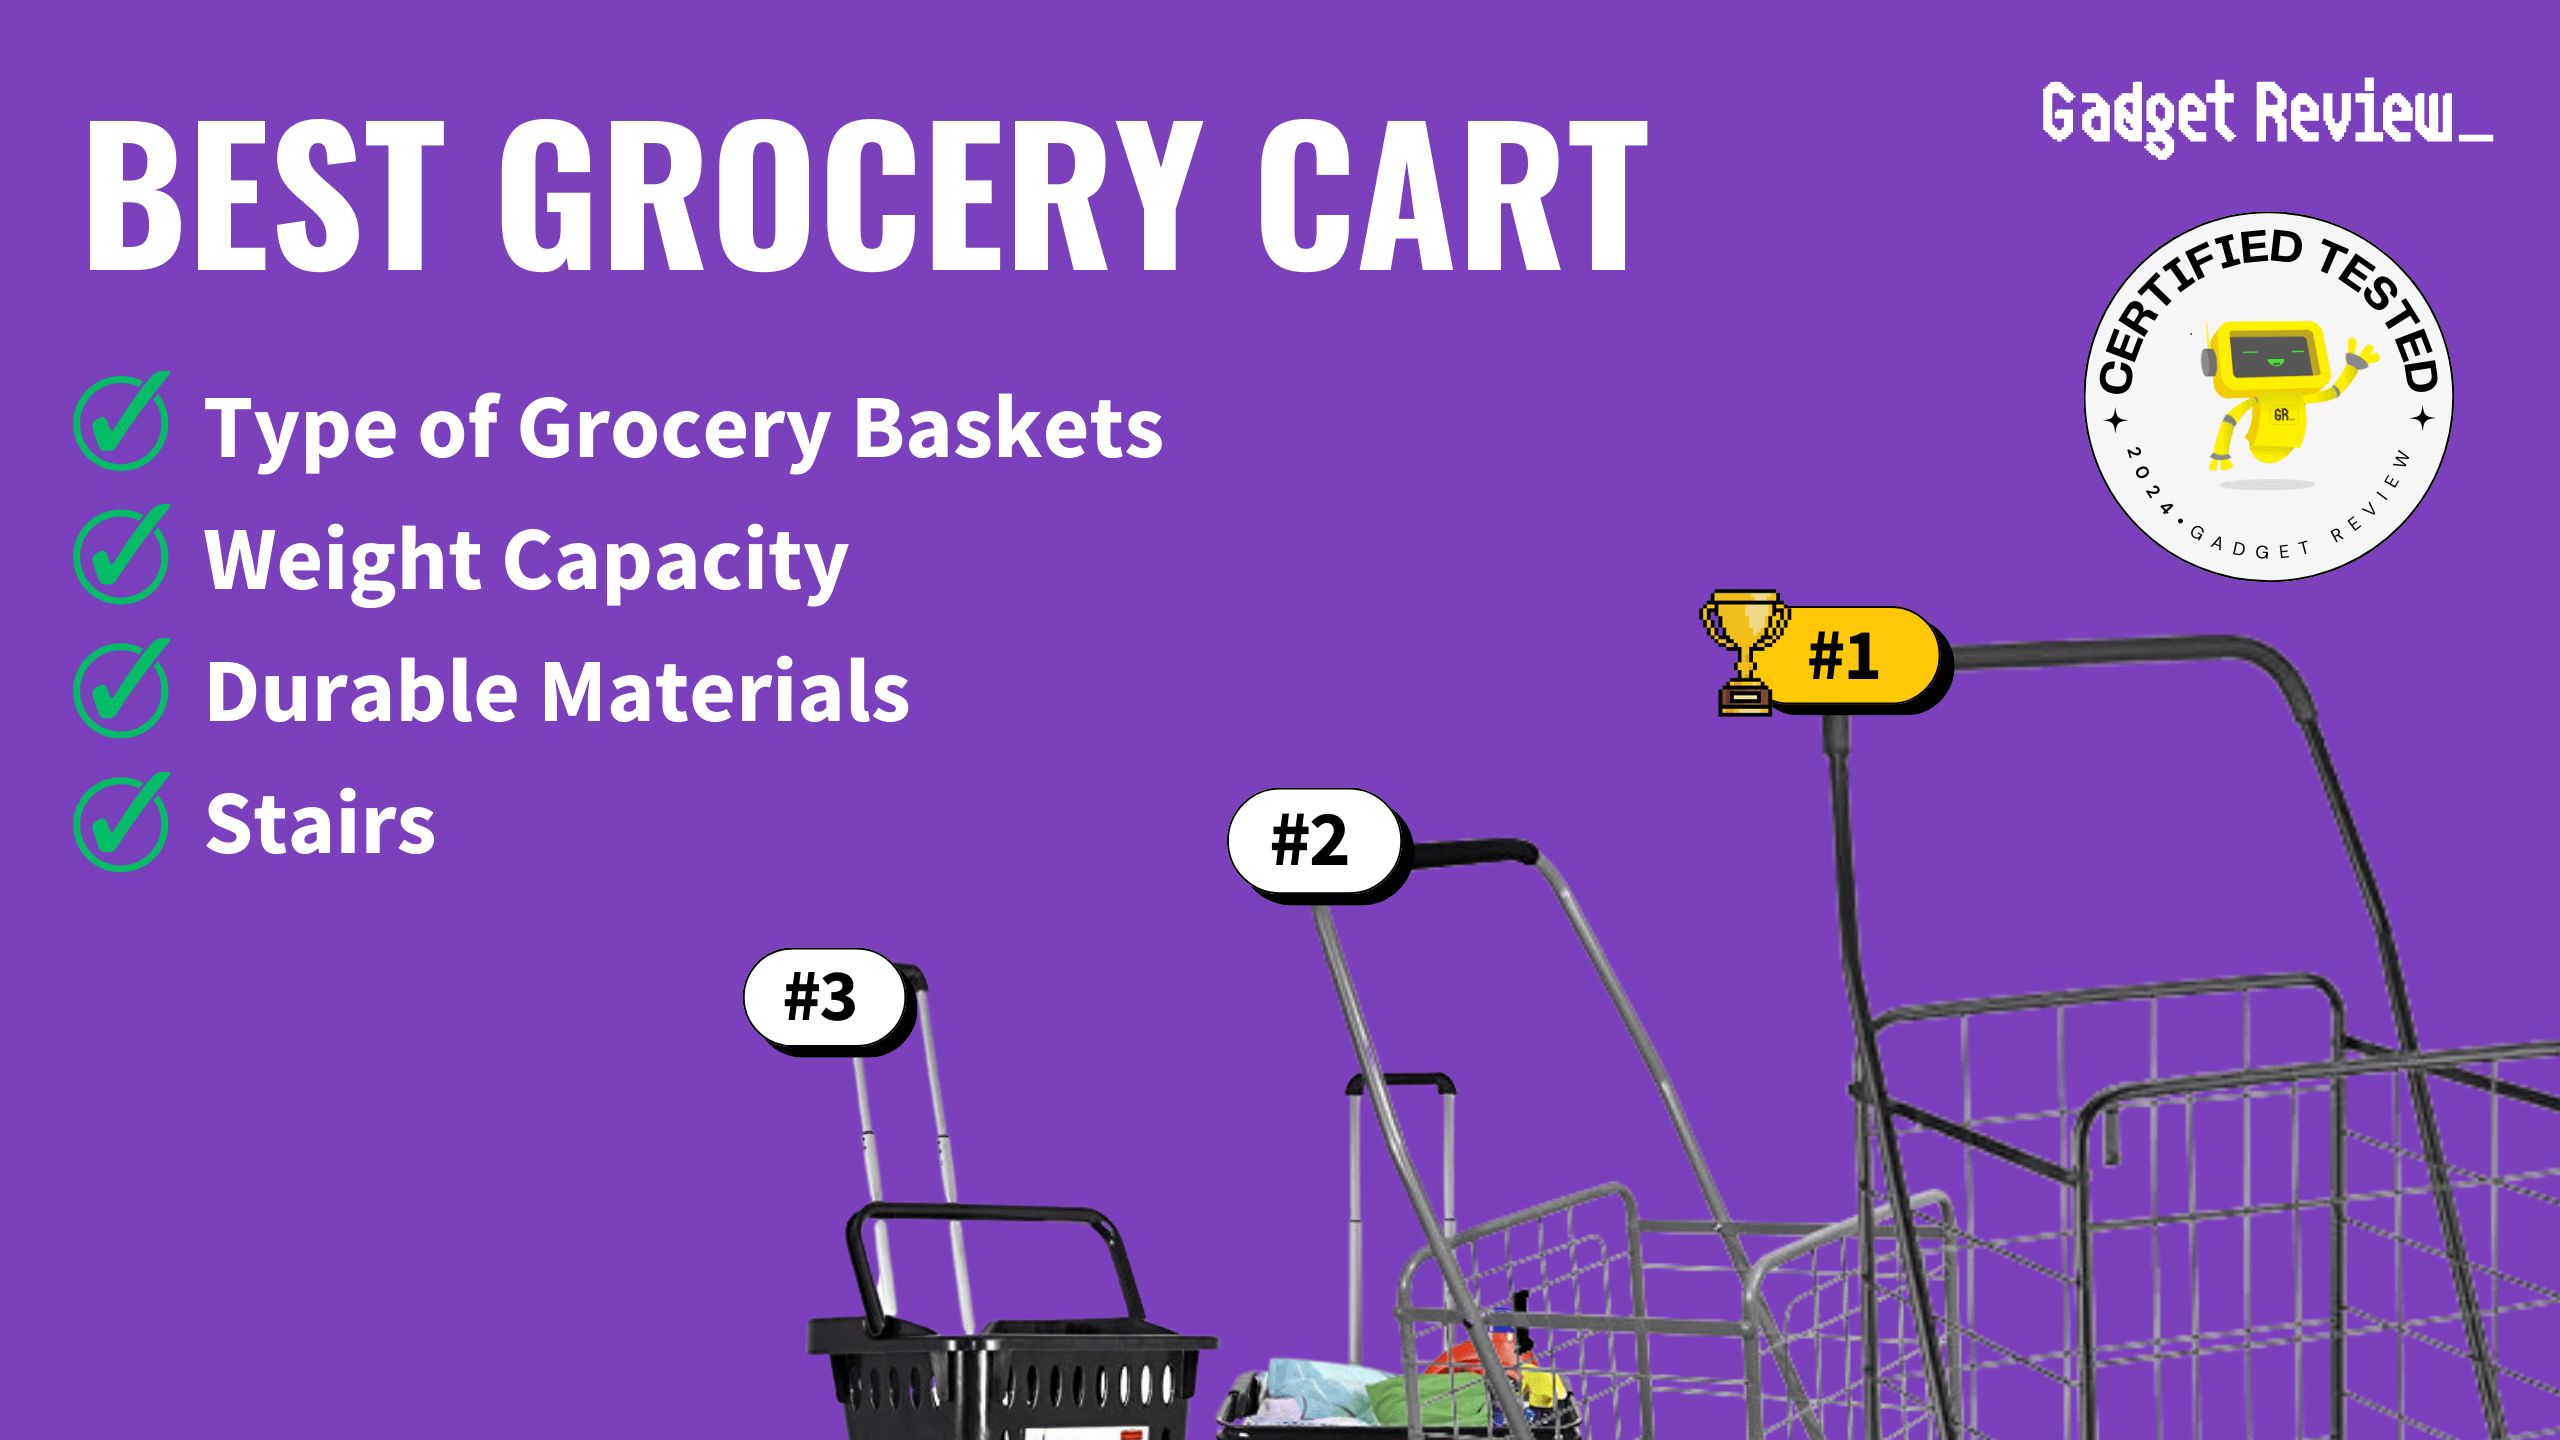 best grocery cart guide that shows the top best kitchen product model